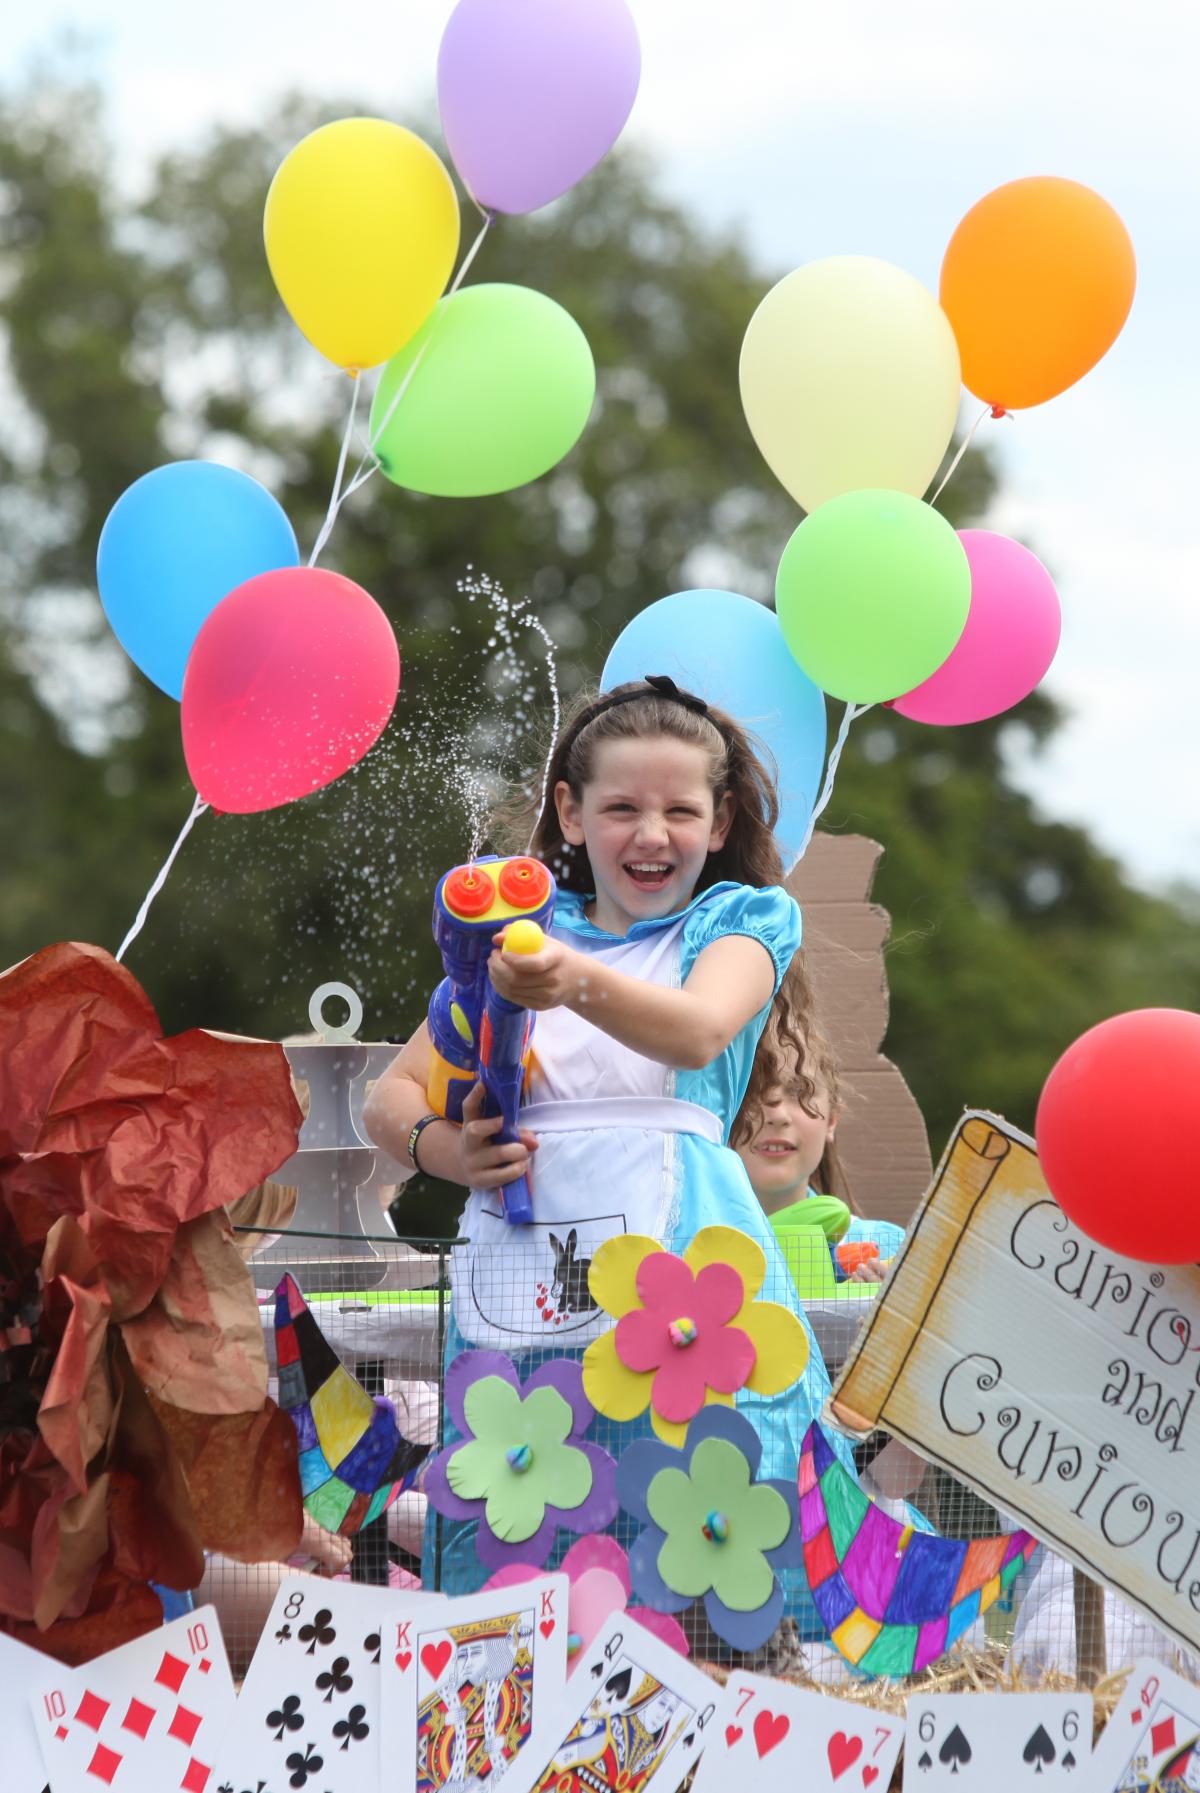 Alice in Wonderland targets the Daily Echo photographer